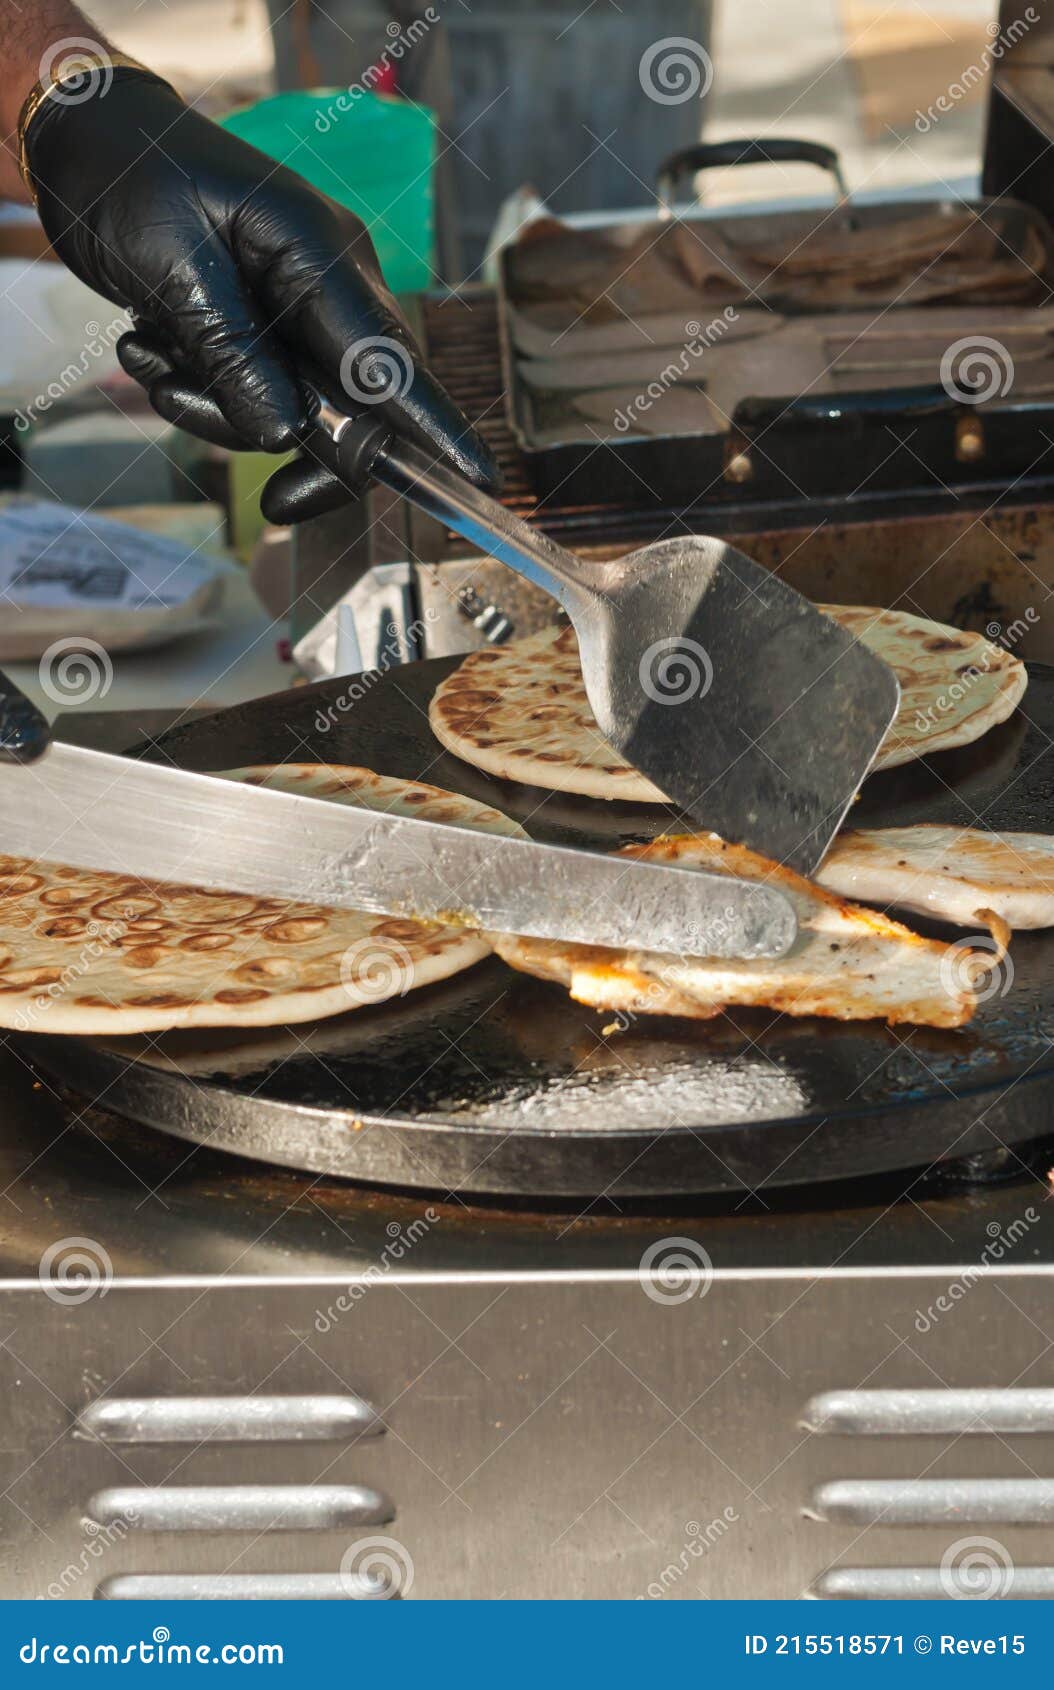 grilled chicken  and flat bread in a flat grill, being moved by a vender with knife and spatula